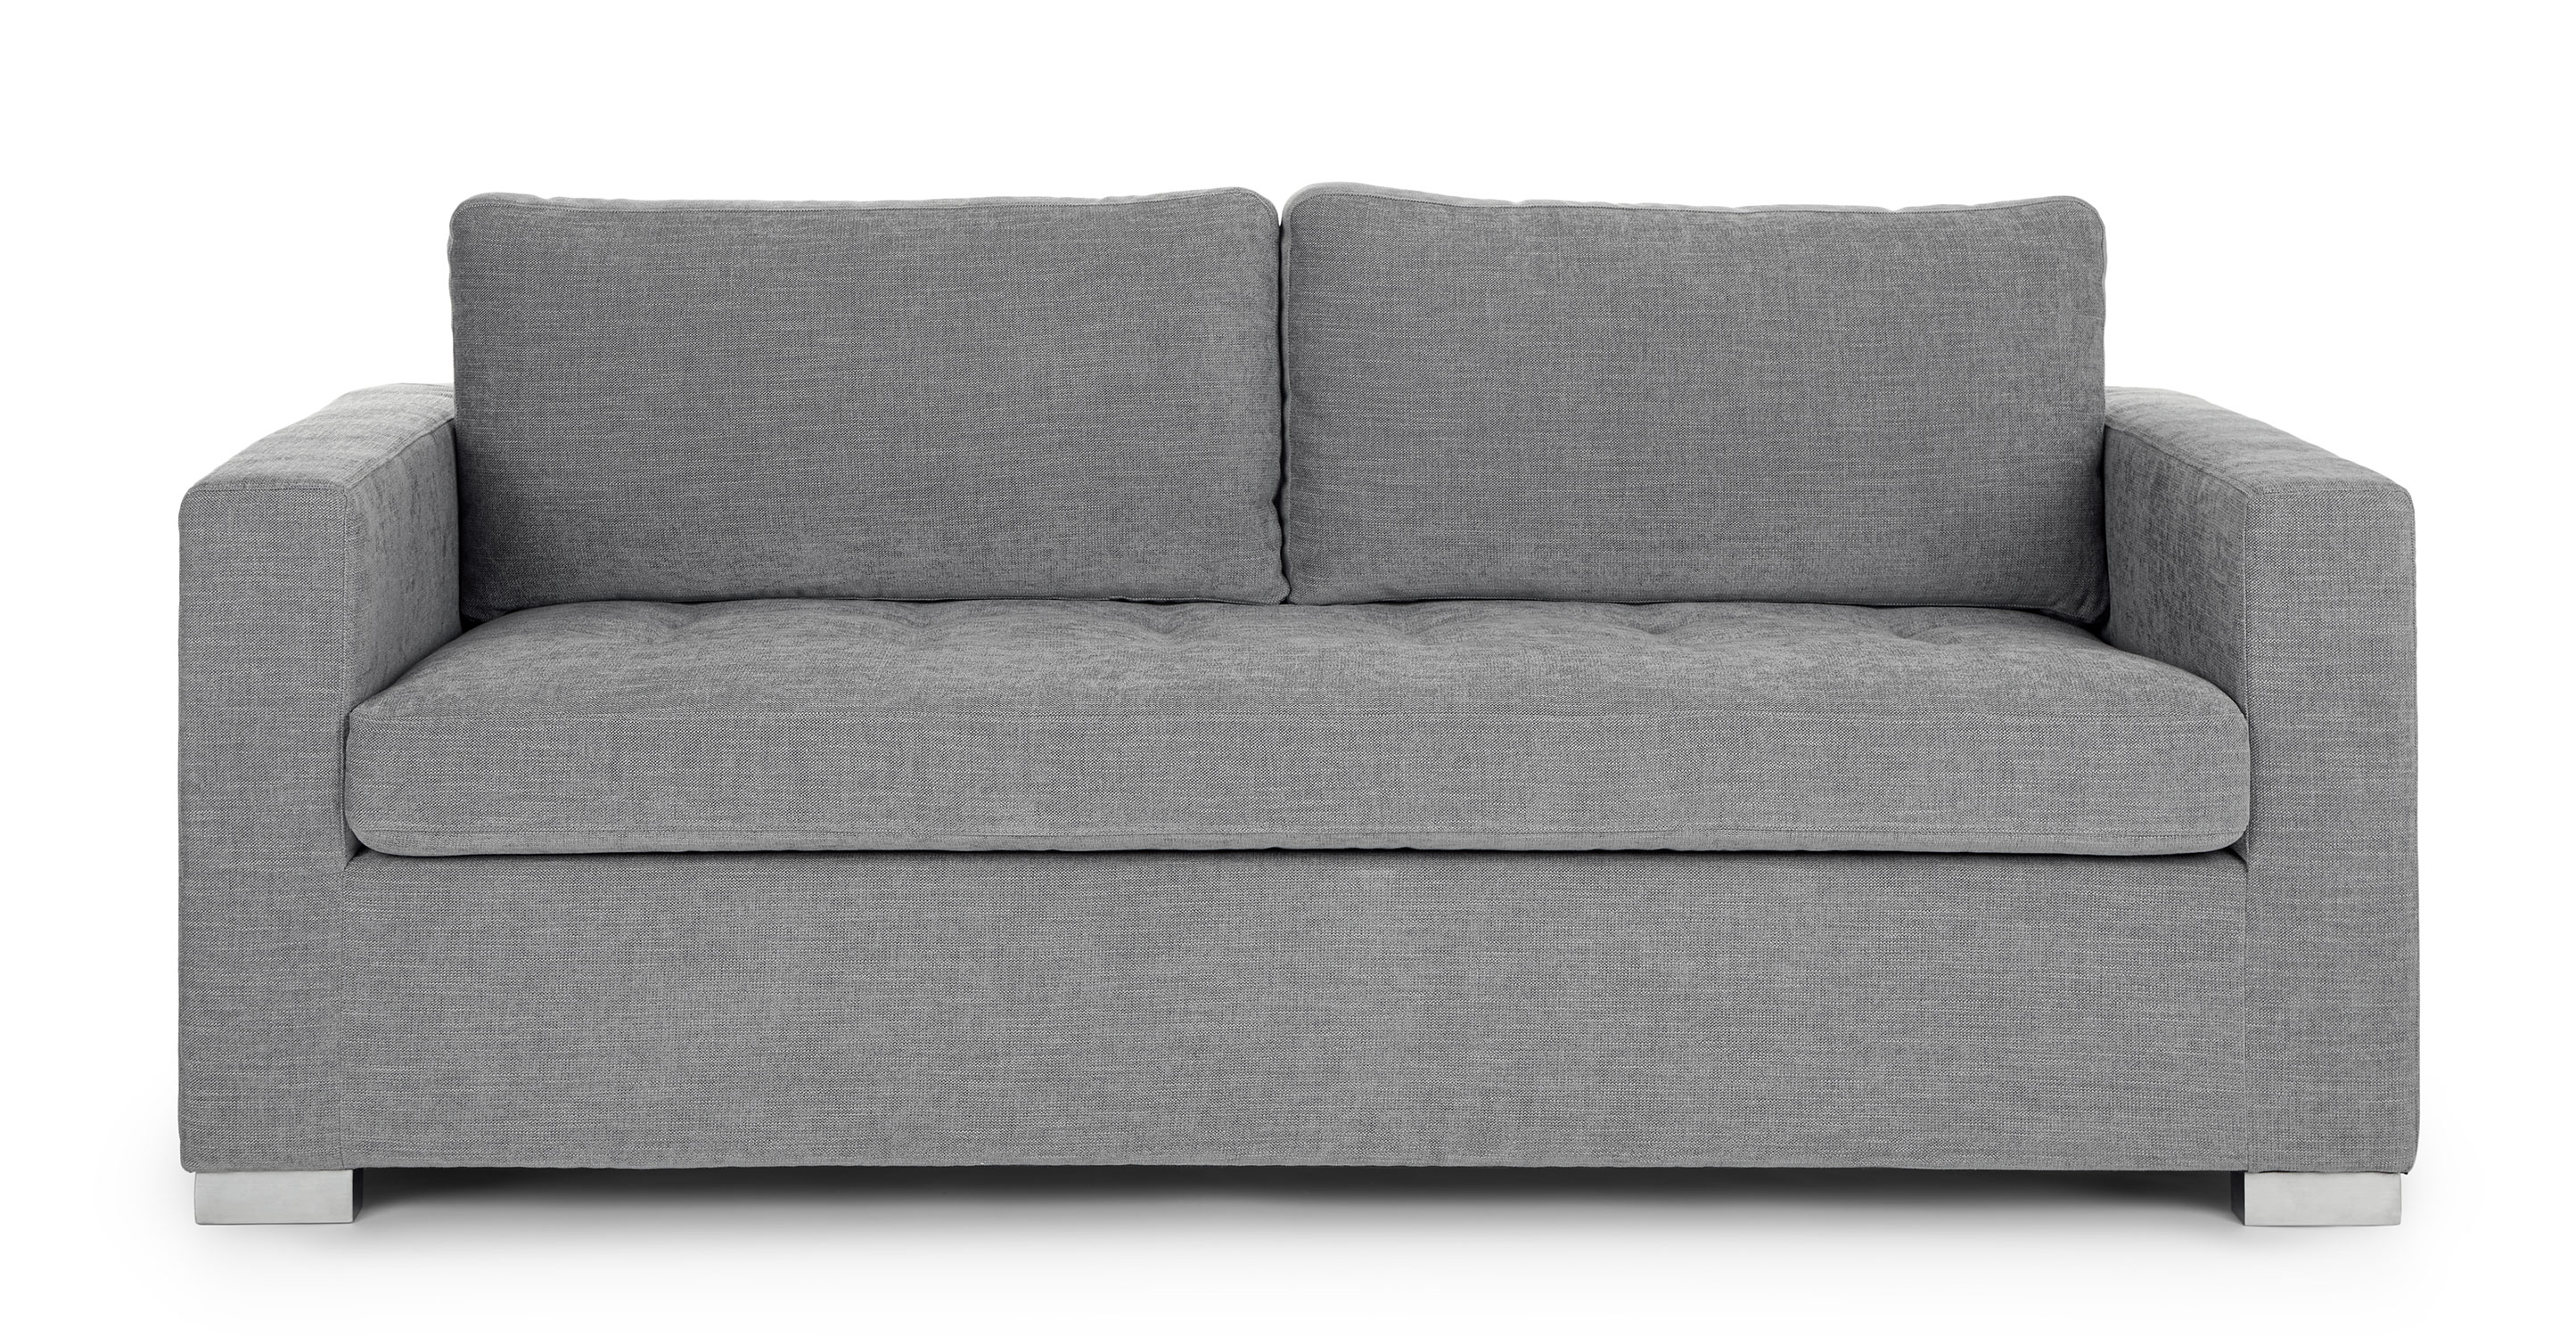 Dawn Gray Fabric 3 Seater Sofa Bed Soma Article